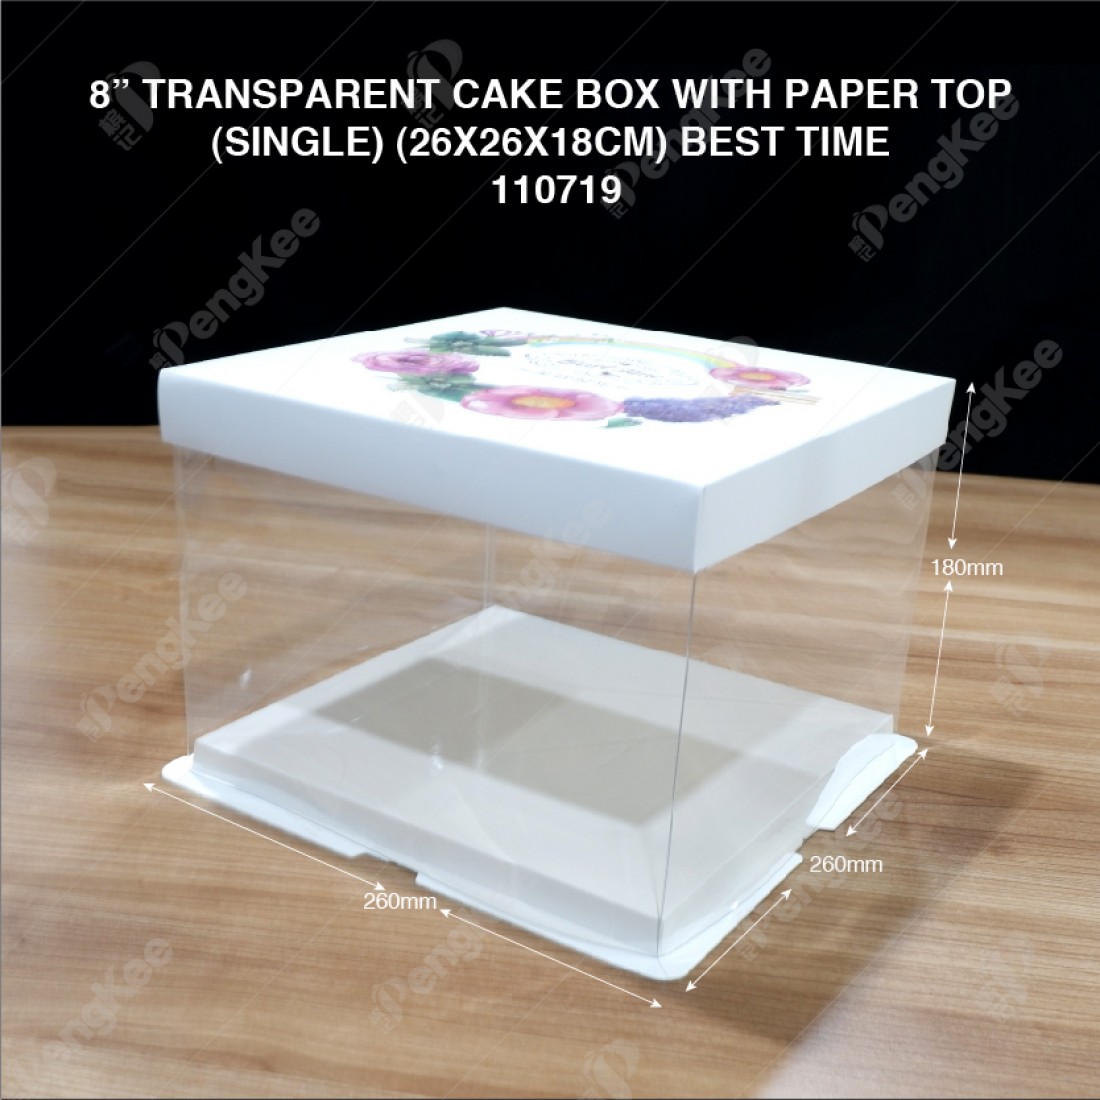 8" TRANSPARENT CAKE BOX WITH PAPER TOP(SINGLE) (26*26*18CM)- BEST TIME